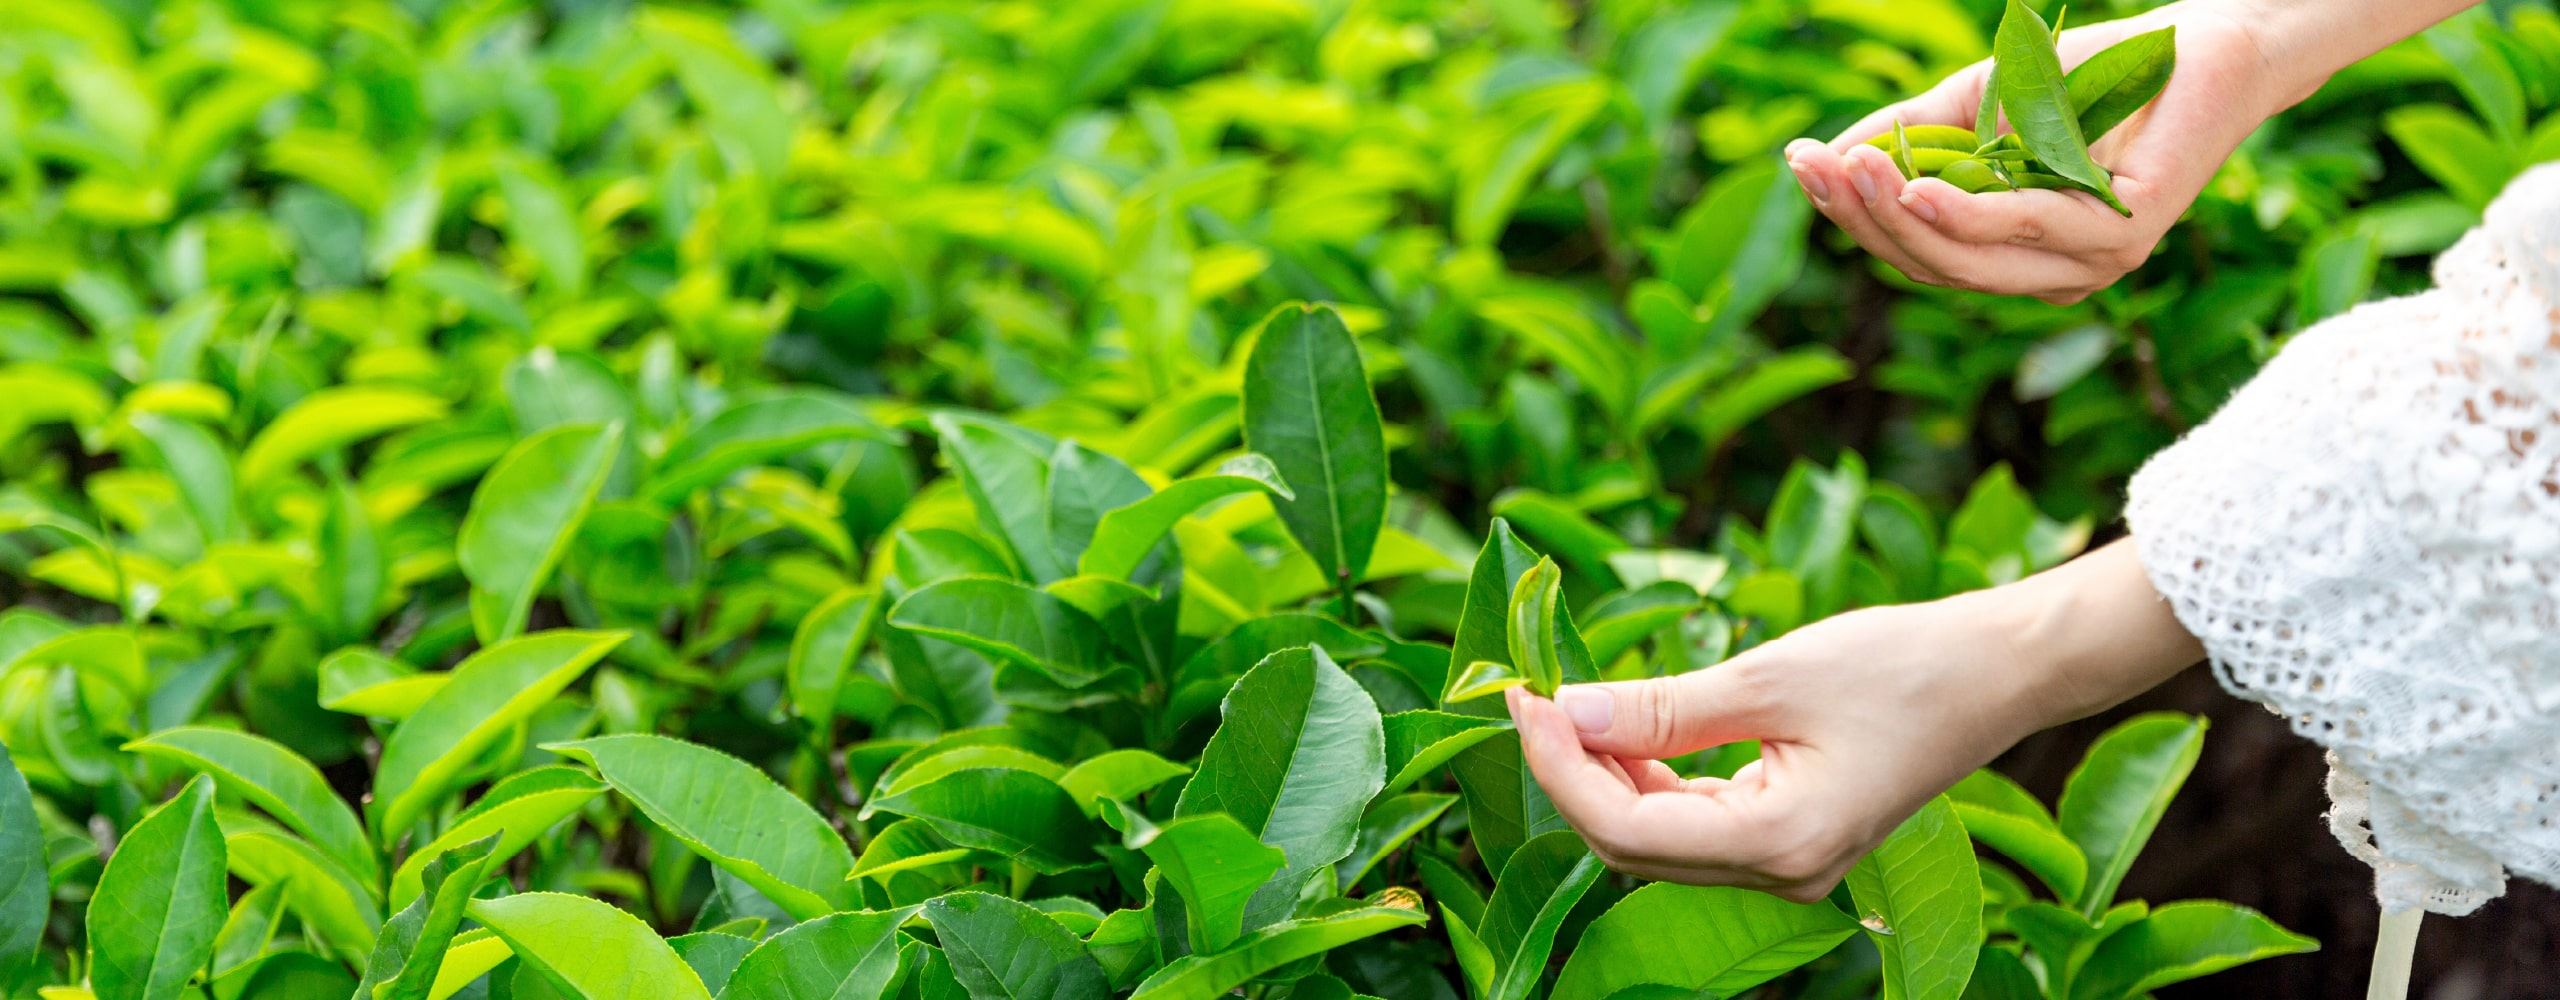 The Benefits Of Green Tea For Skin, Advice